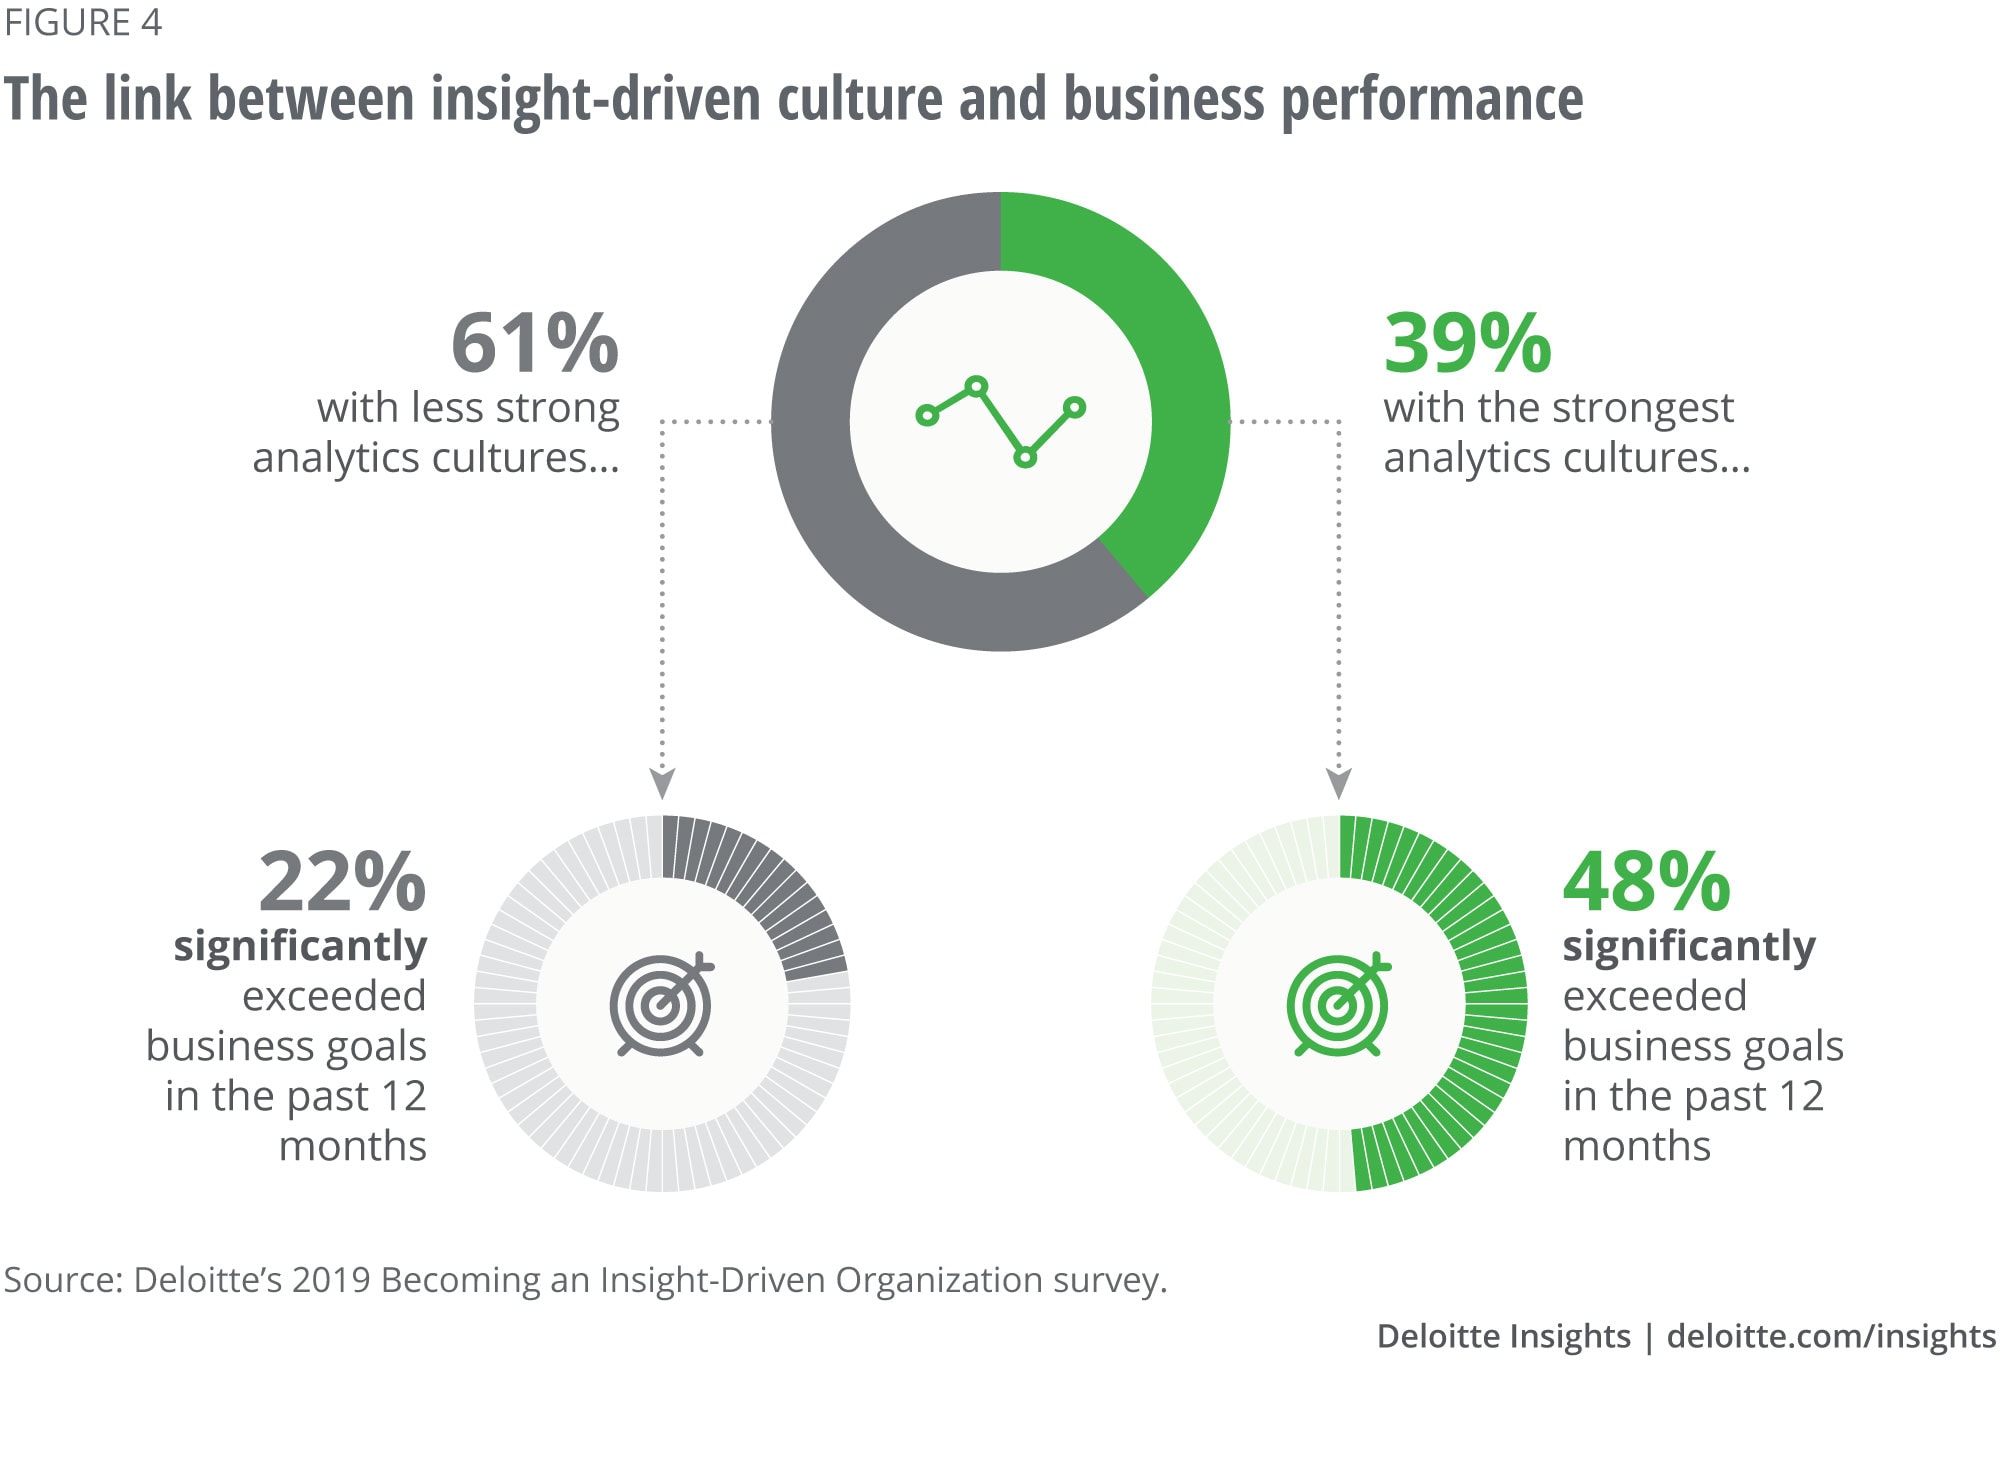 The link between insight-driven culture and business performance